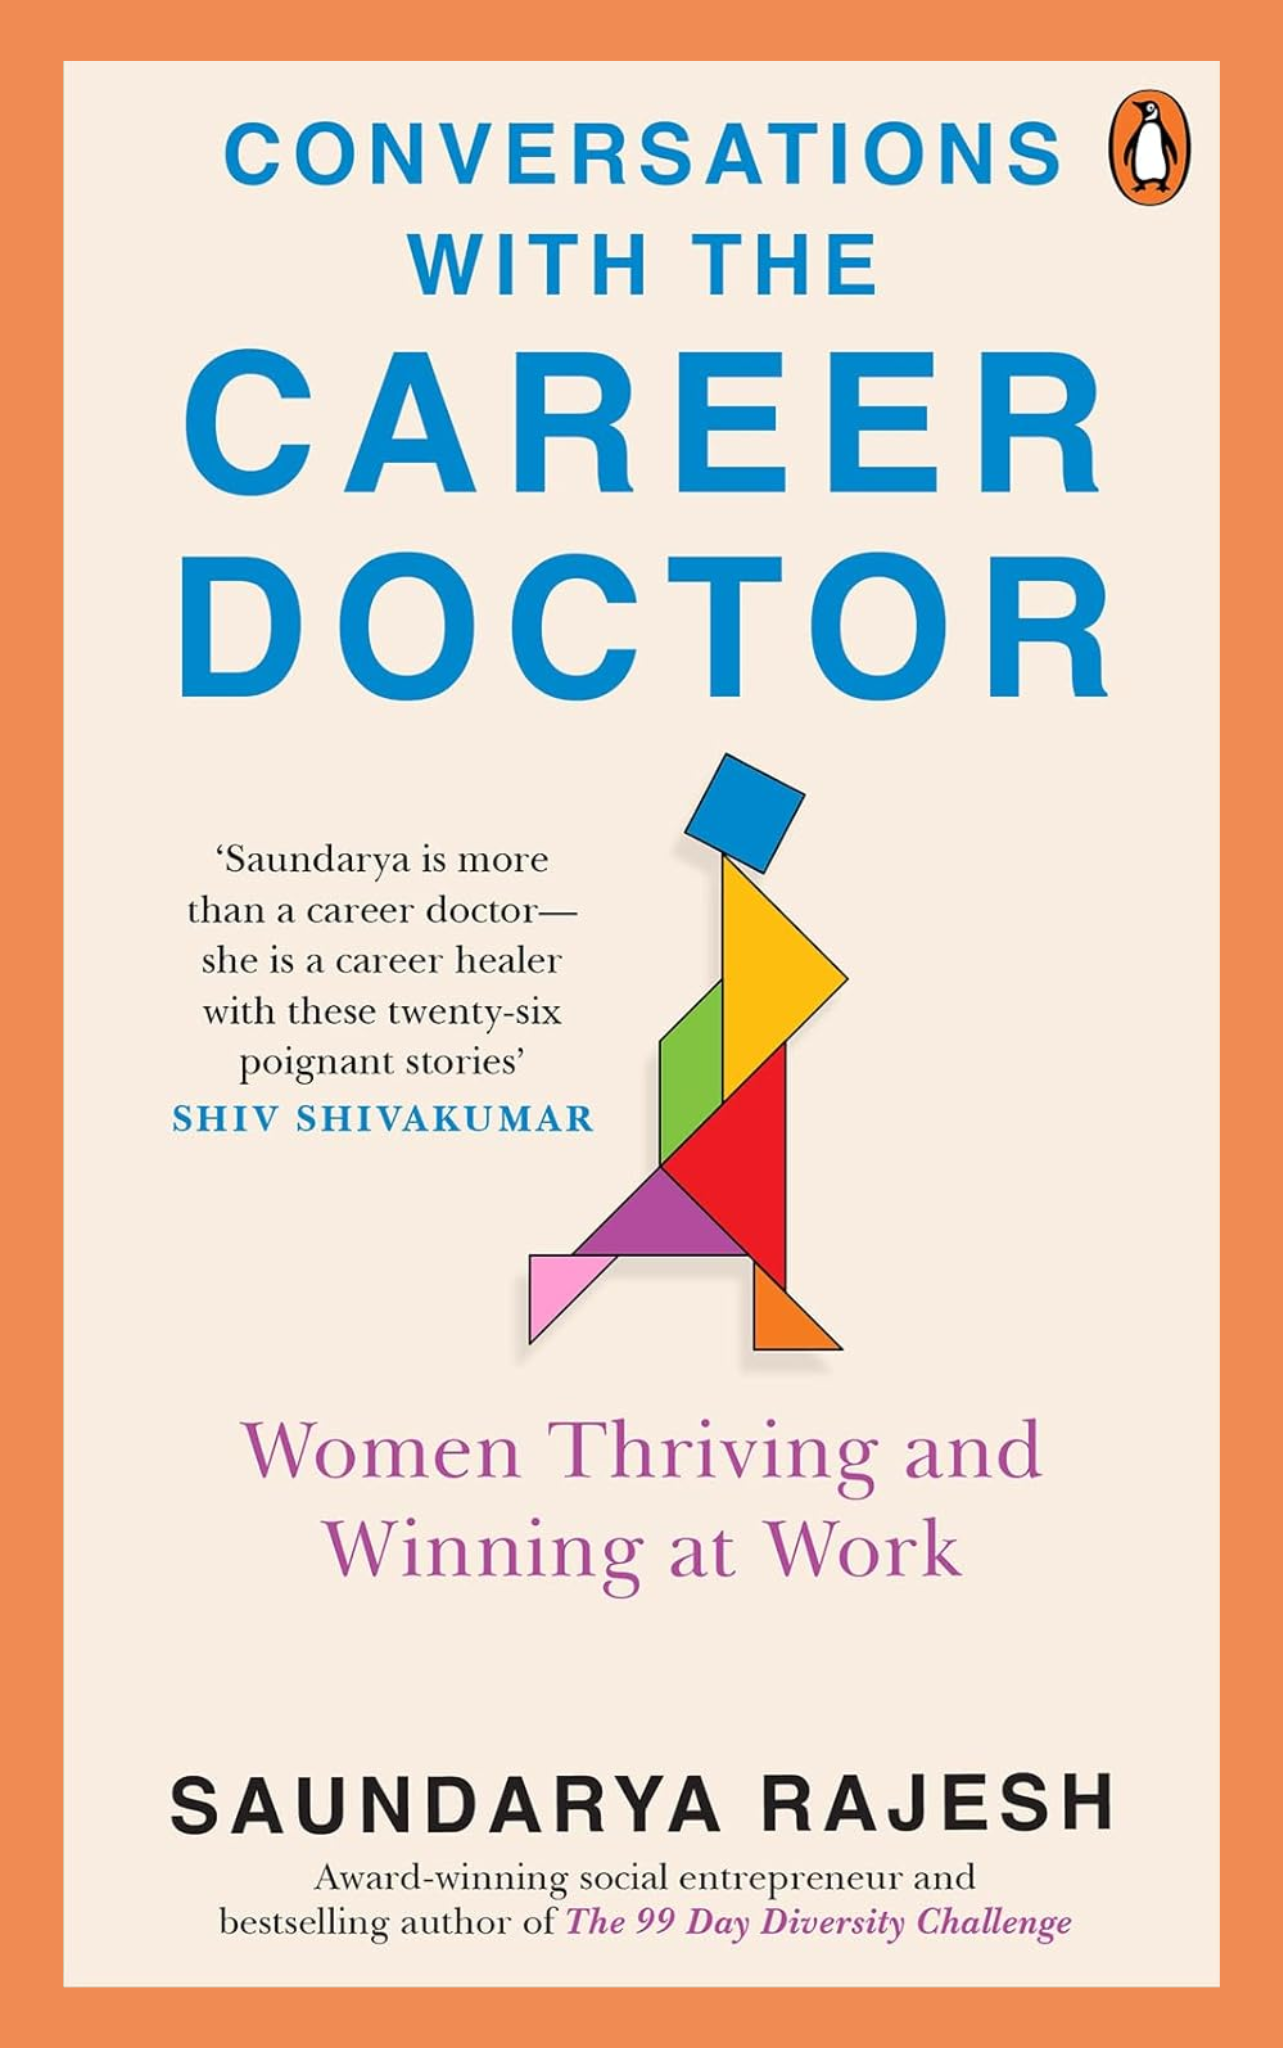 Conversations with the Career Doctor by Saundarya Rajesh